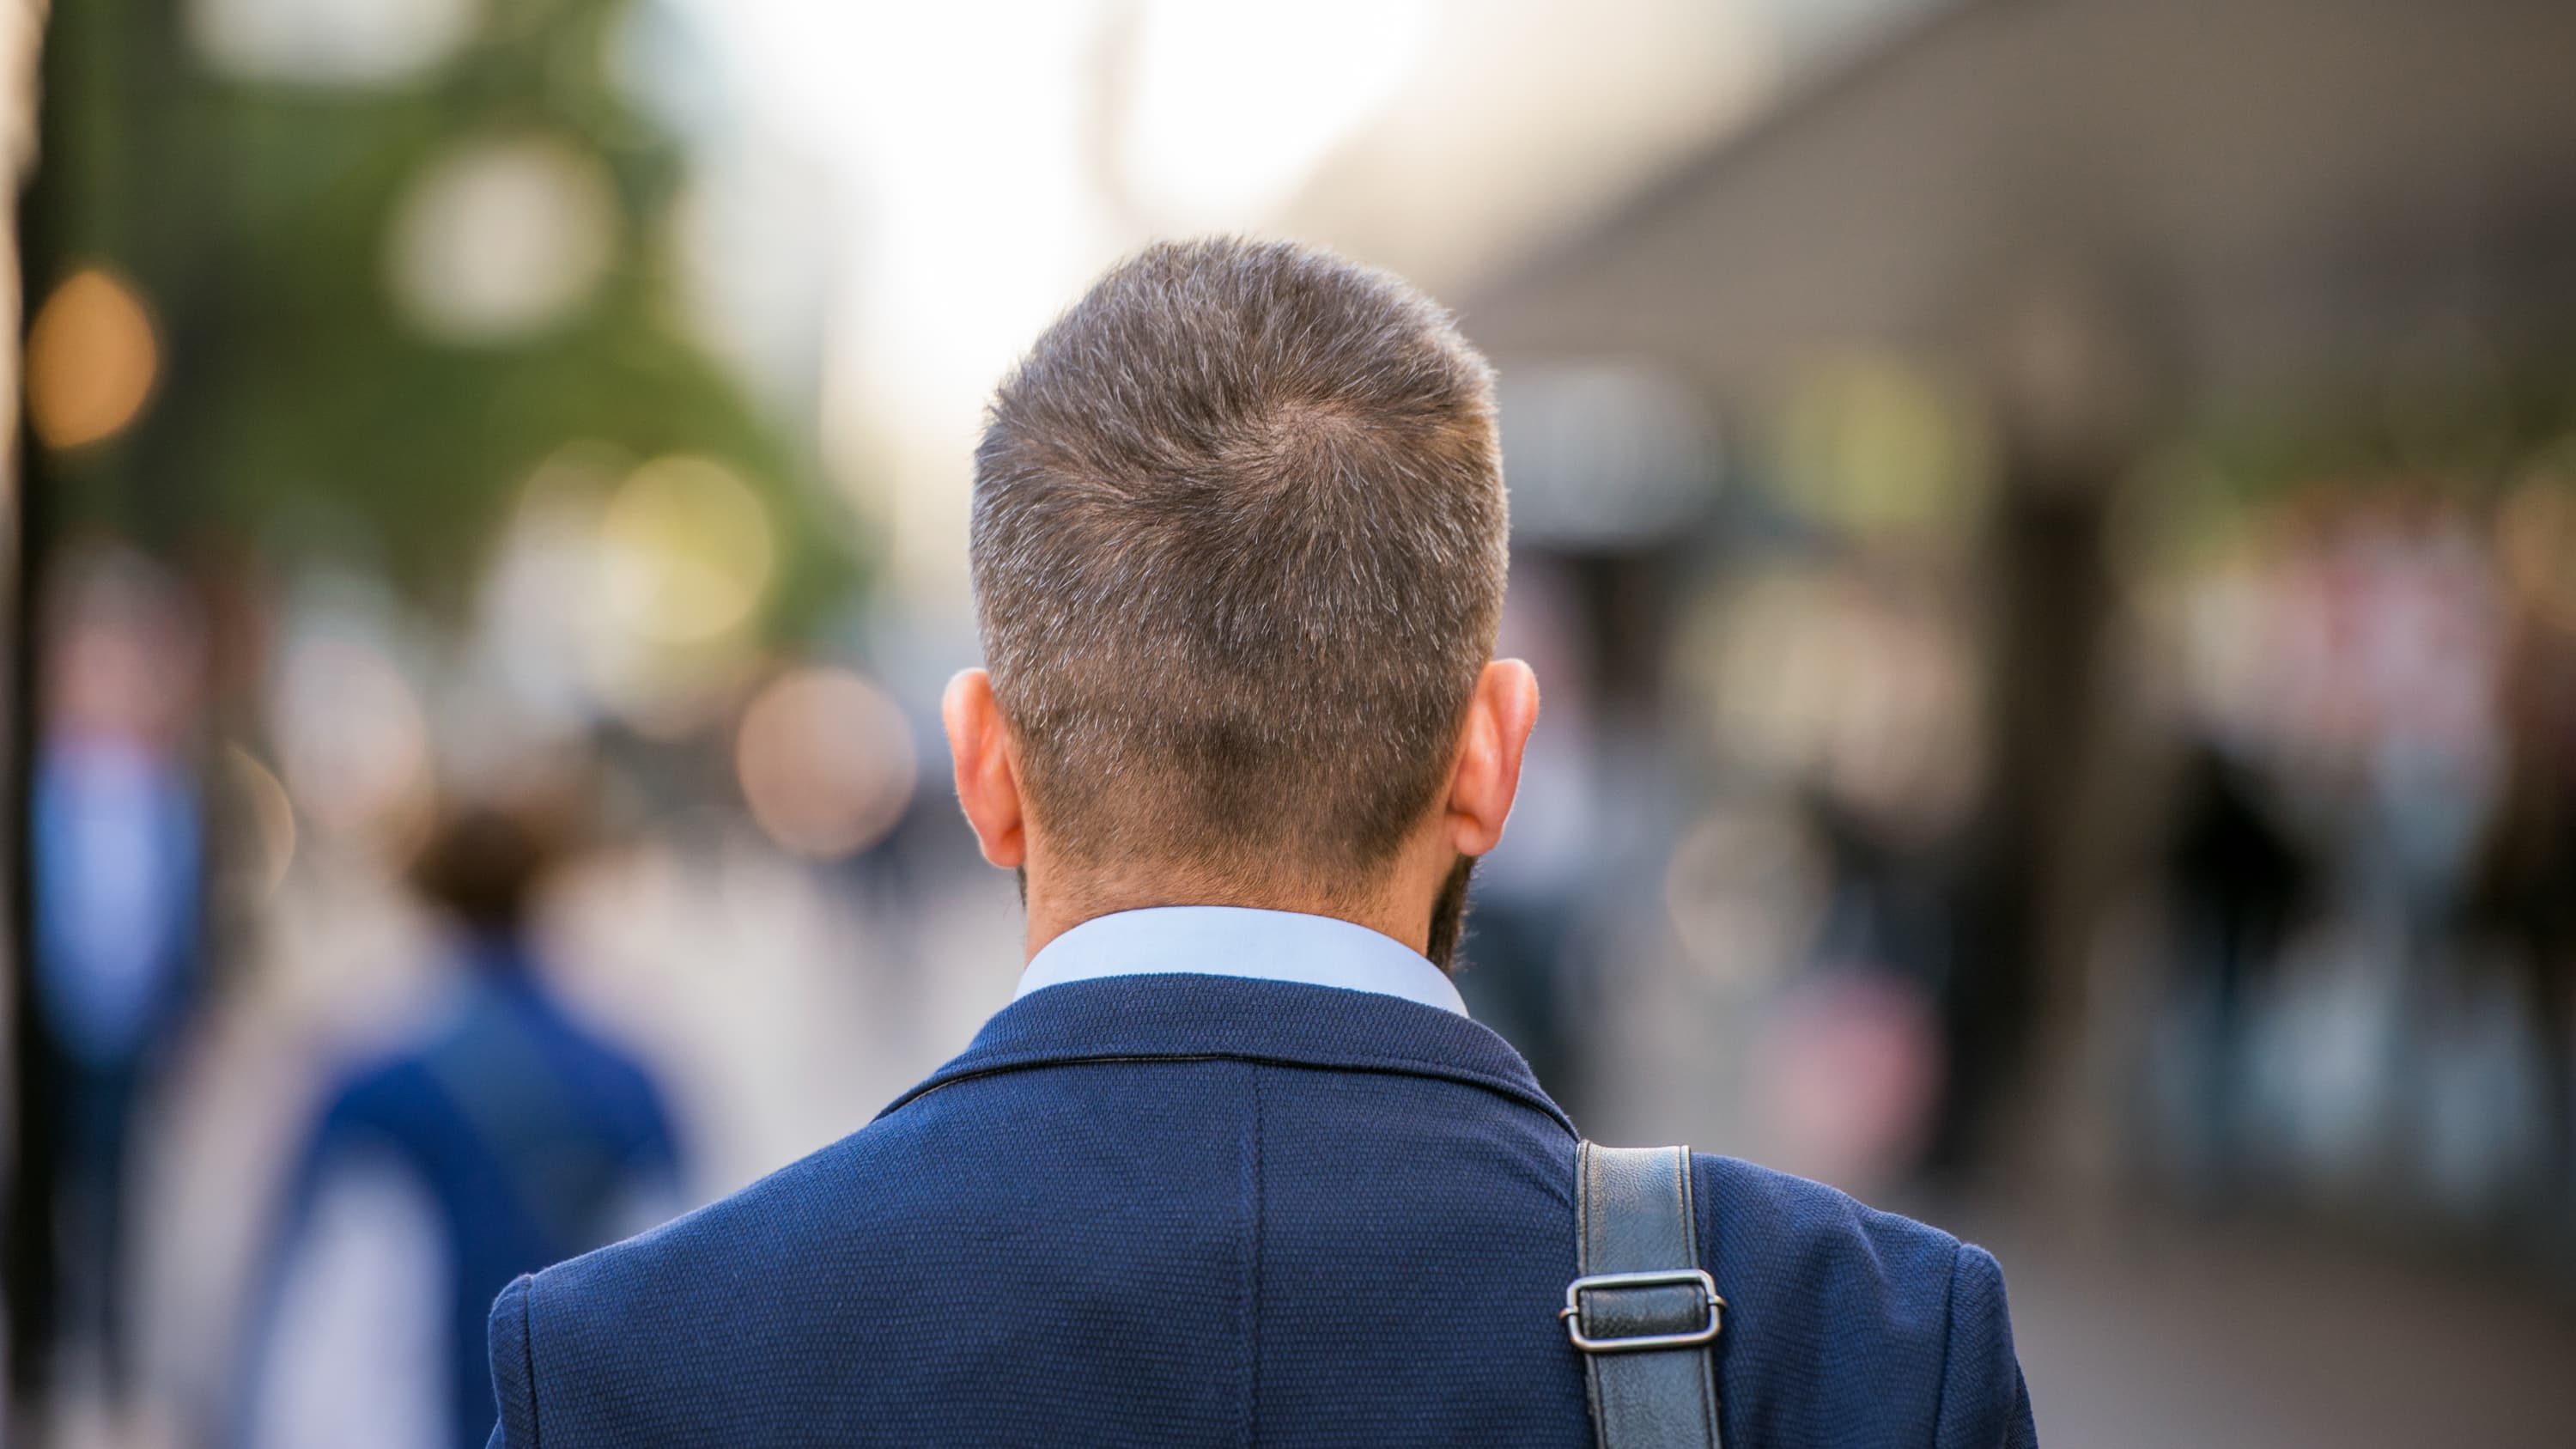 A man with a pituitary tumor walks down a crowded sidewalk.